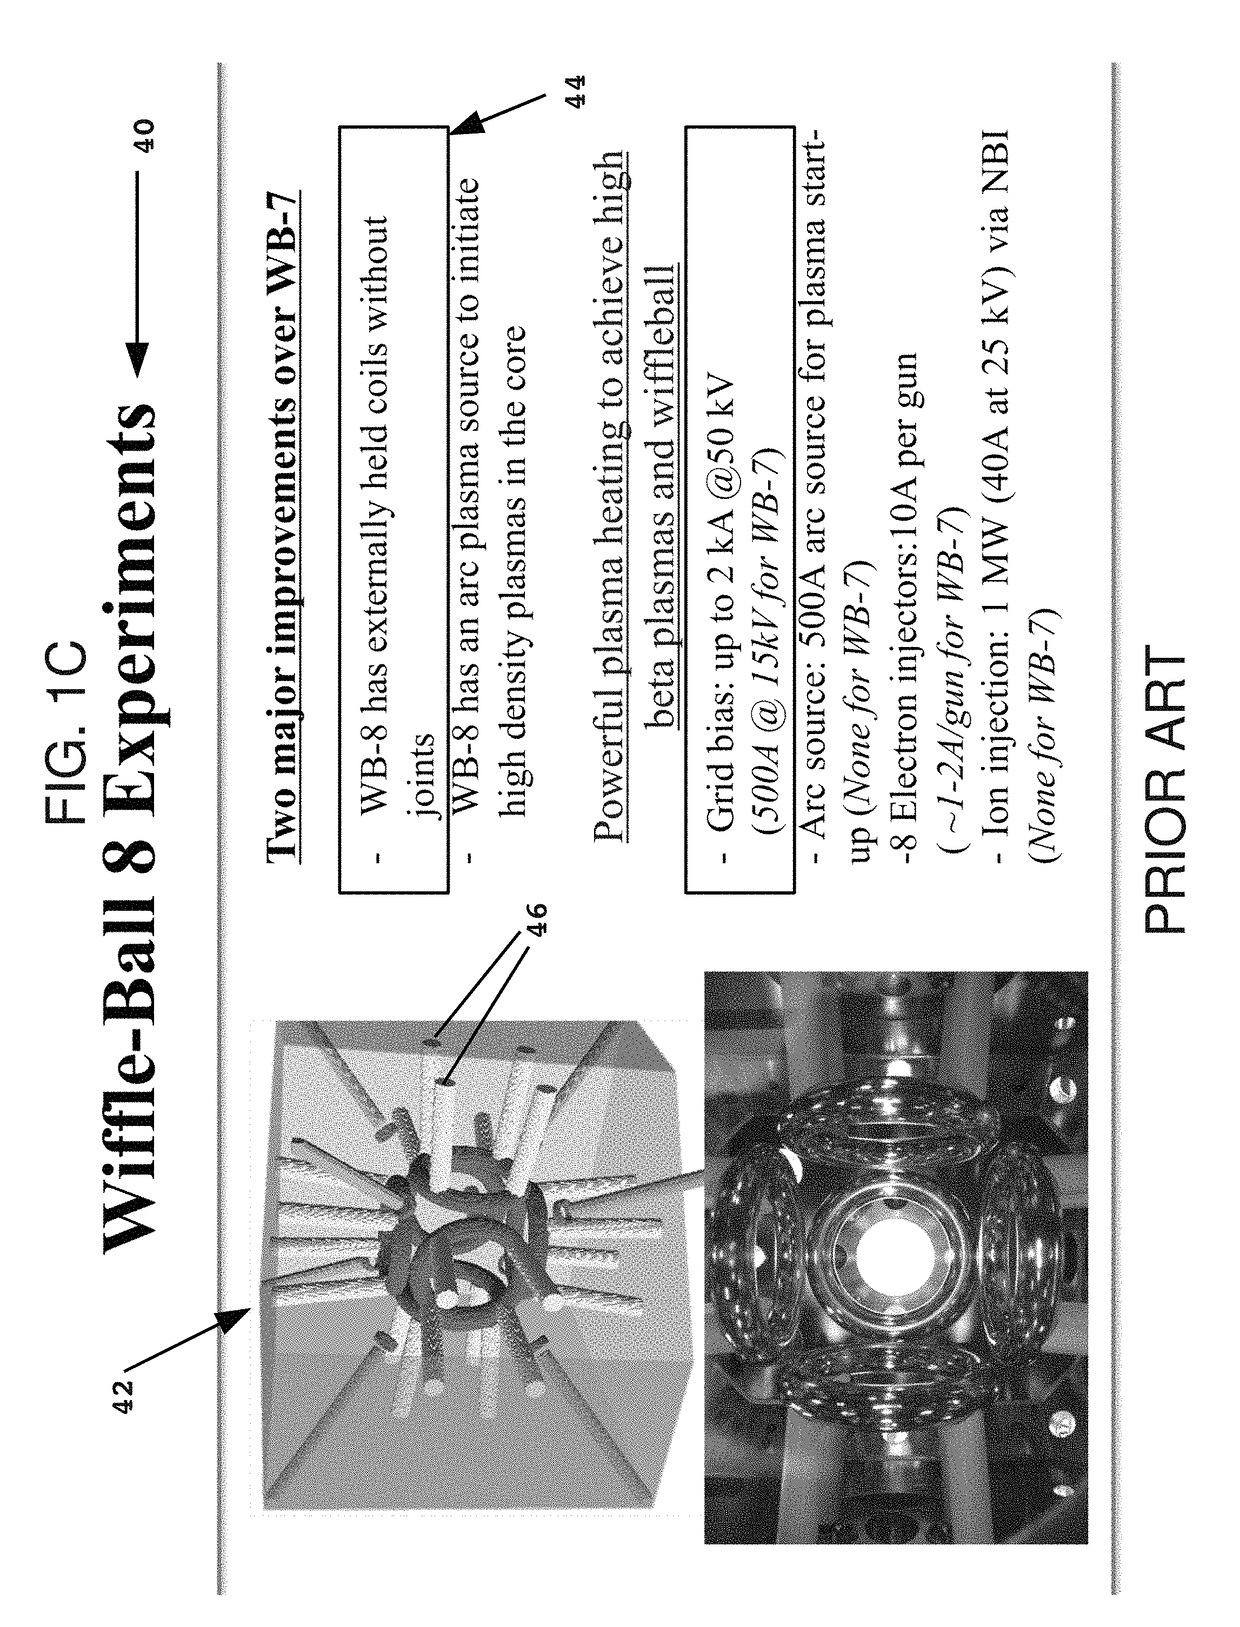 Apparatus and method for controlling a plasma fusion reactor